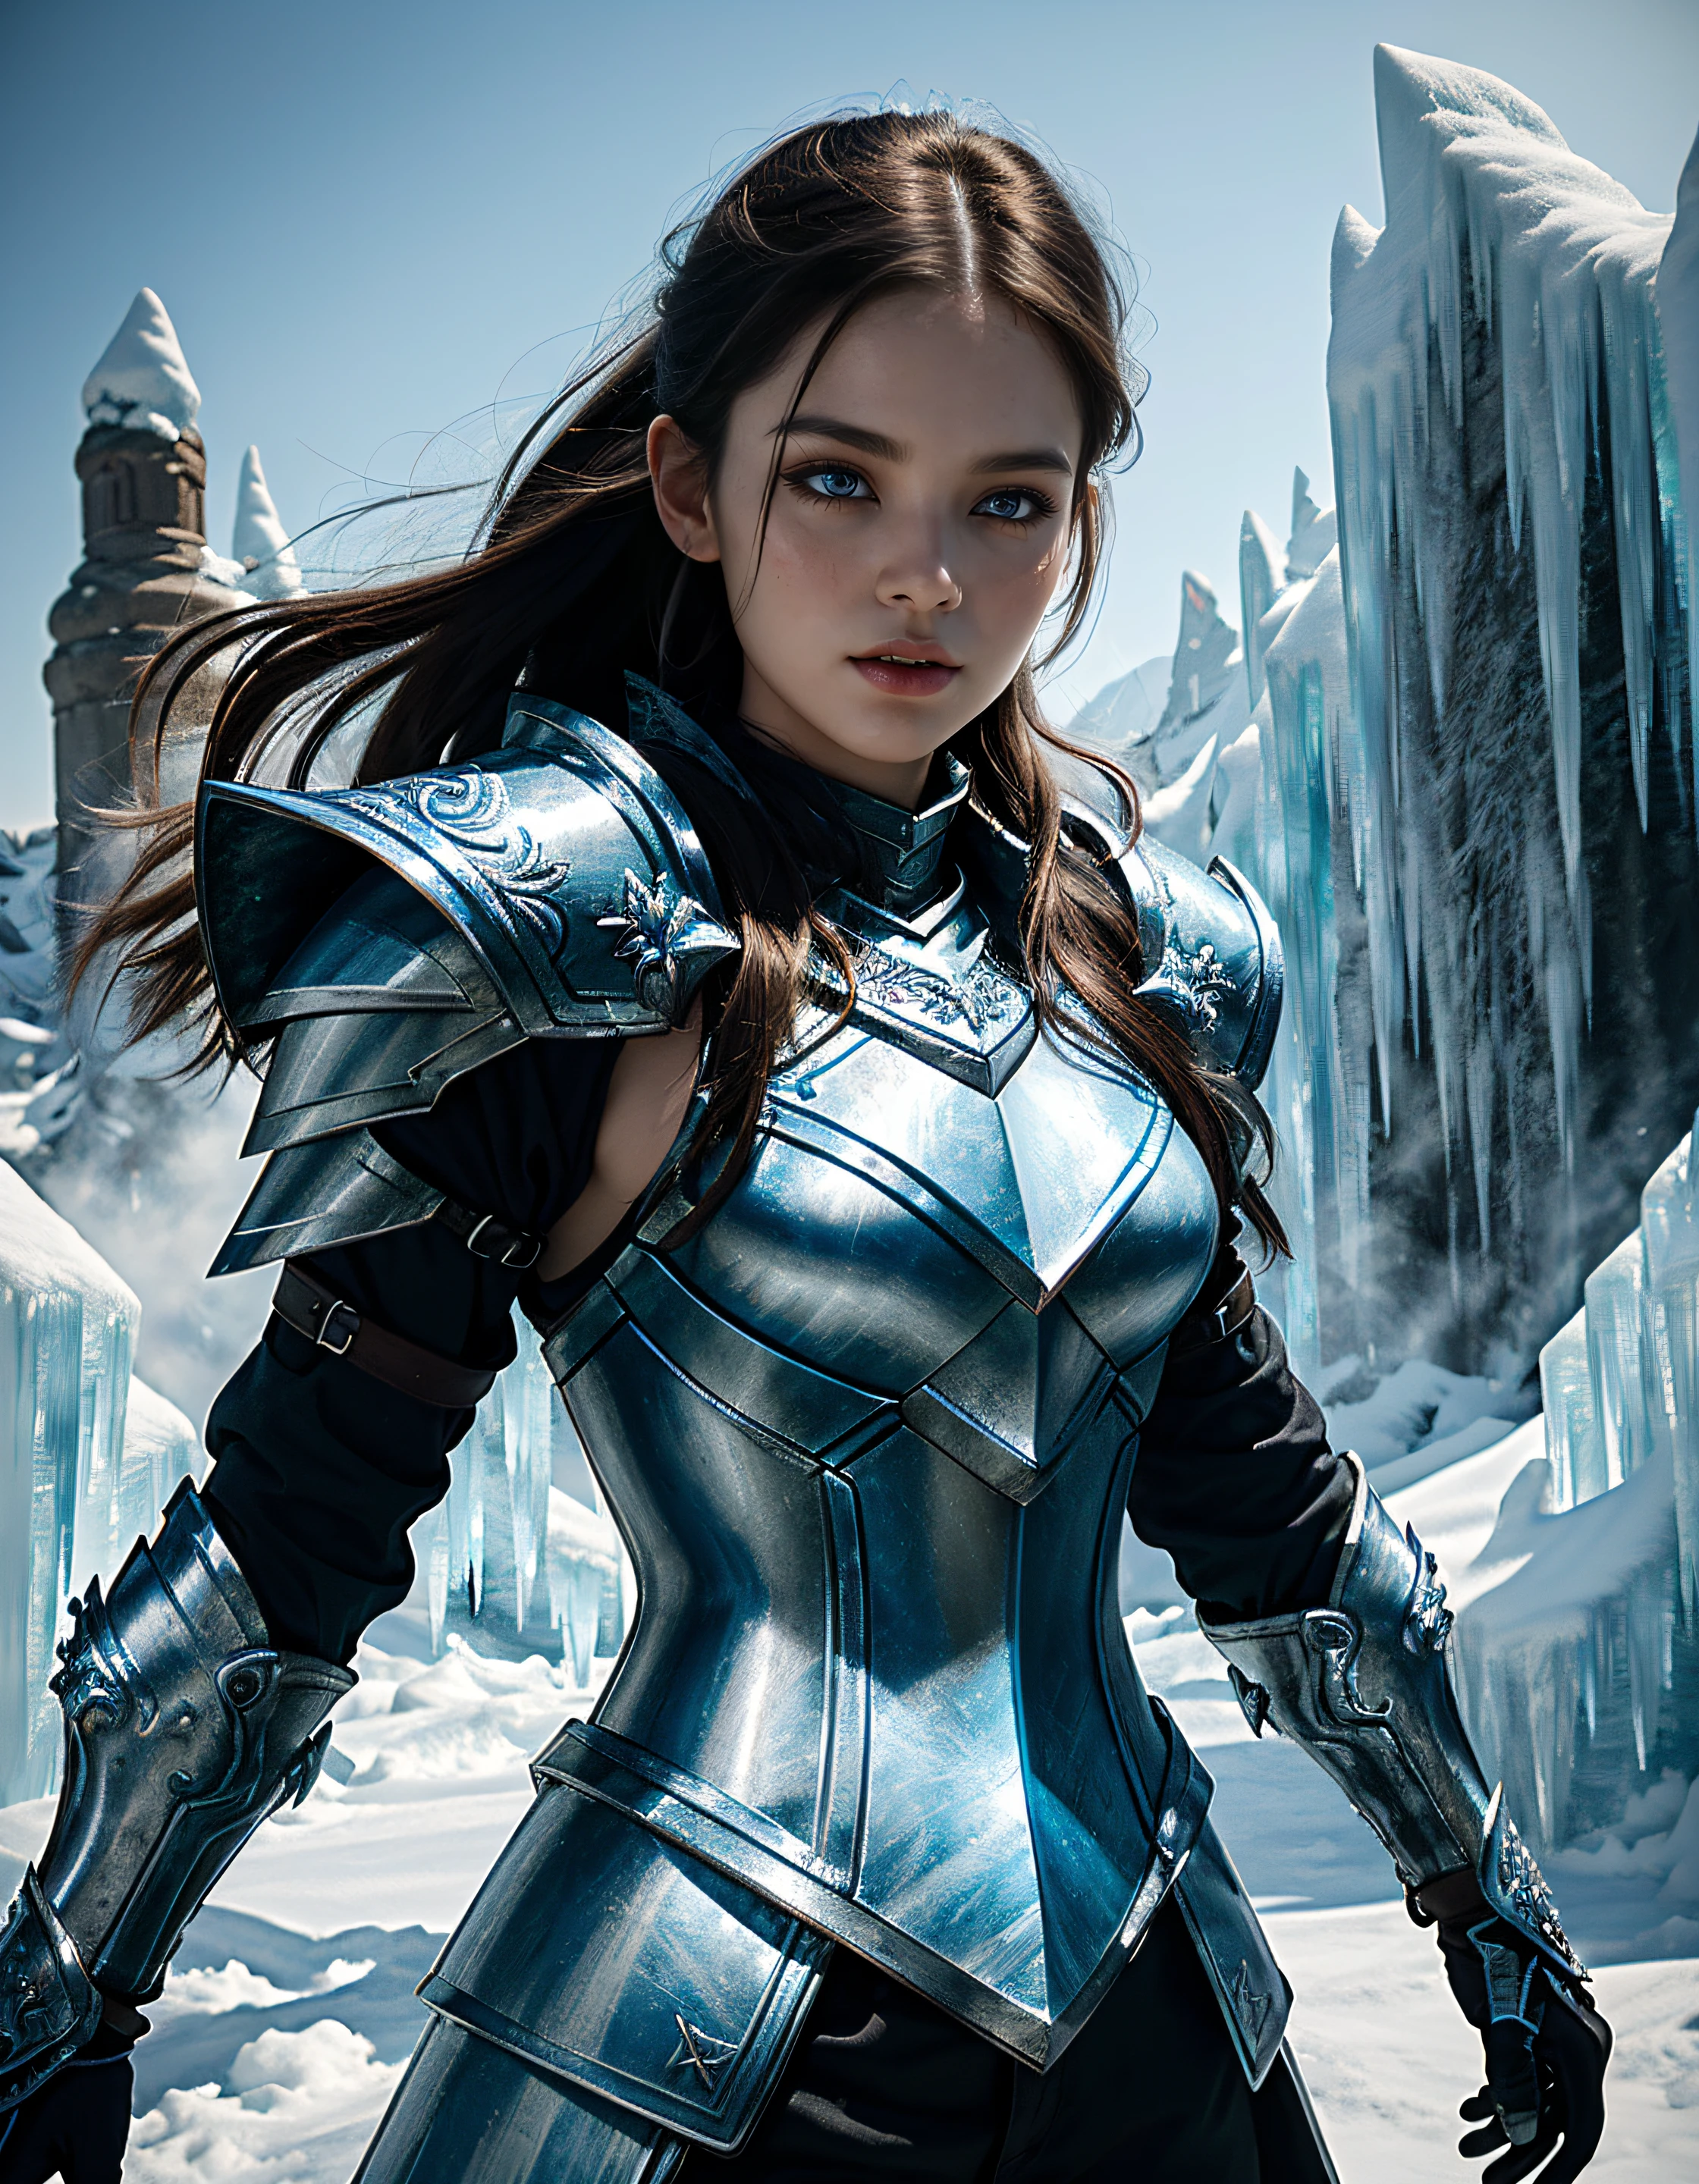 (Masterpiece:1.3), hight resolution, Best Quality, (Extremely detailed, Illuminate the area in the background, HD, 8K, extremly intricate:1.3), (Cowboy shot), painting, 1 girl, Ice Dragon, with white long hair, blue eyes, (((ice, are formed on the body, Armor Formation:1.2))),(Ice Armor:1.5),ice, (Ice Sword:1.2),GlowingRunes_Blue, Runes on the stomach (Ice dragon in the background), (HDR, hyper-detailing:1.2).